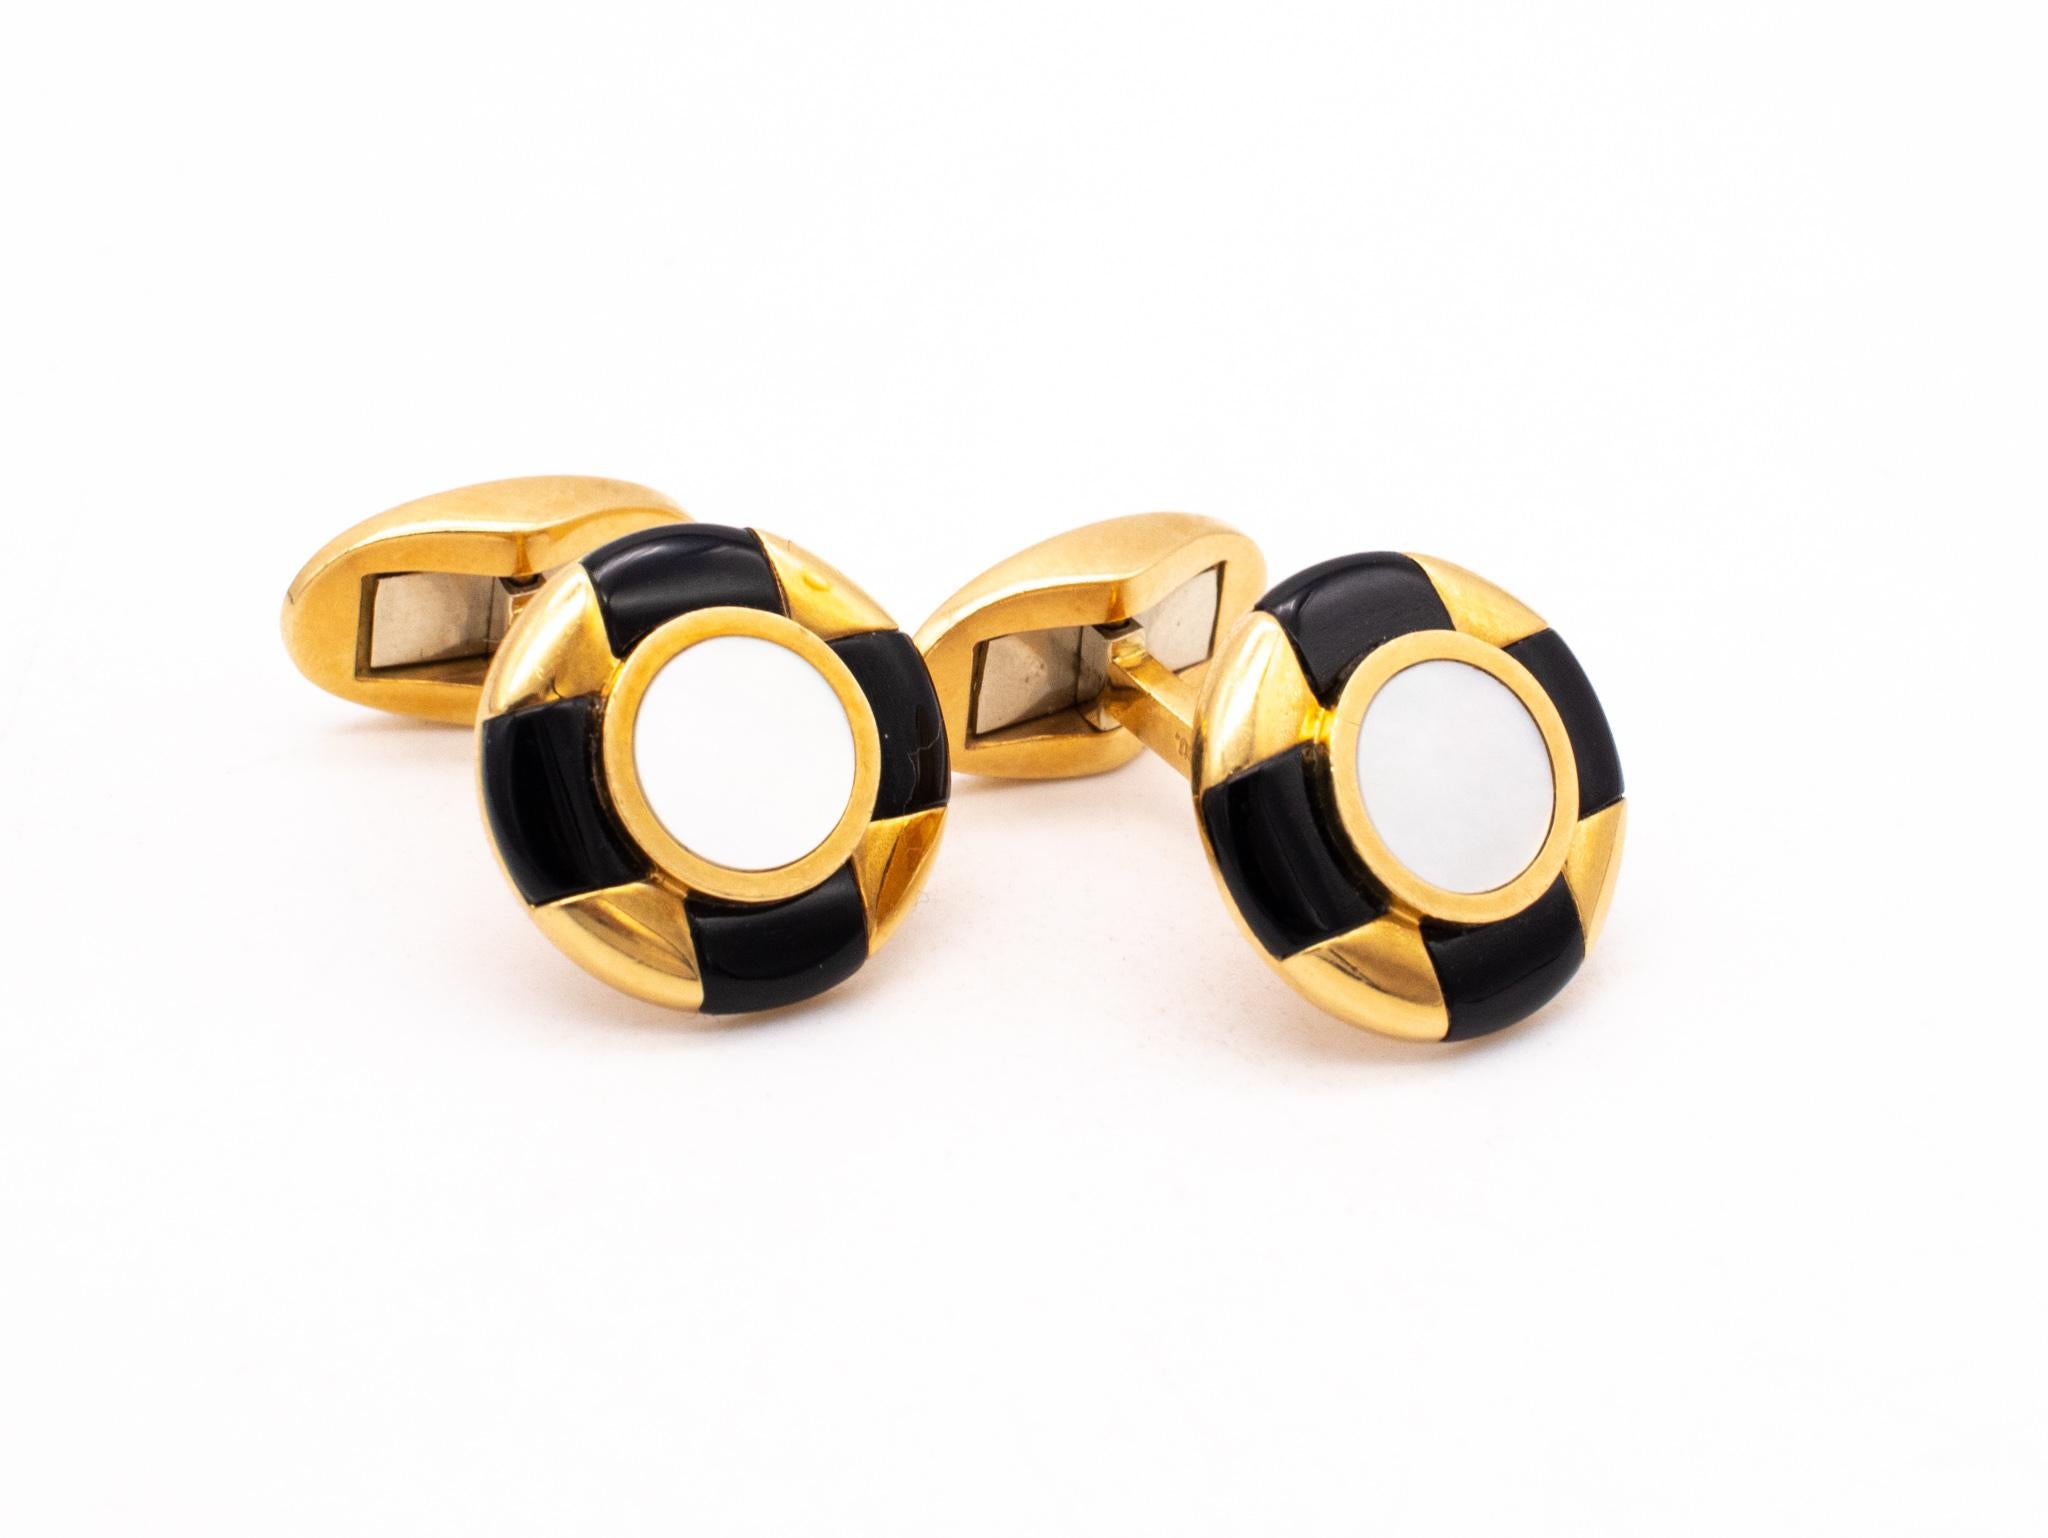 Mixed Cut Tiffany Co Geometric Cufflinks 18Kt Yellow Gold With Black Onyx And White Nacre For Sale